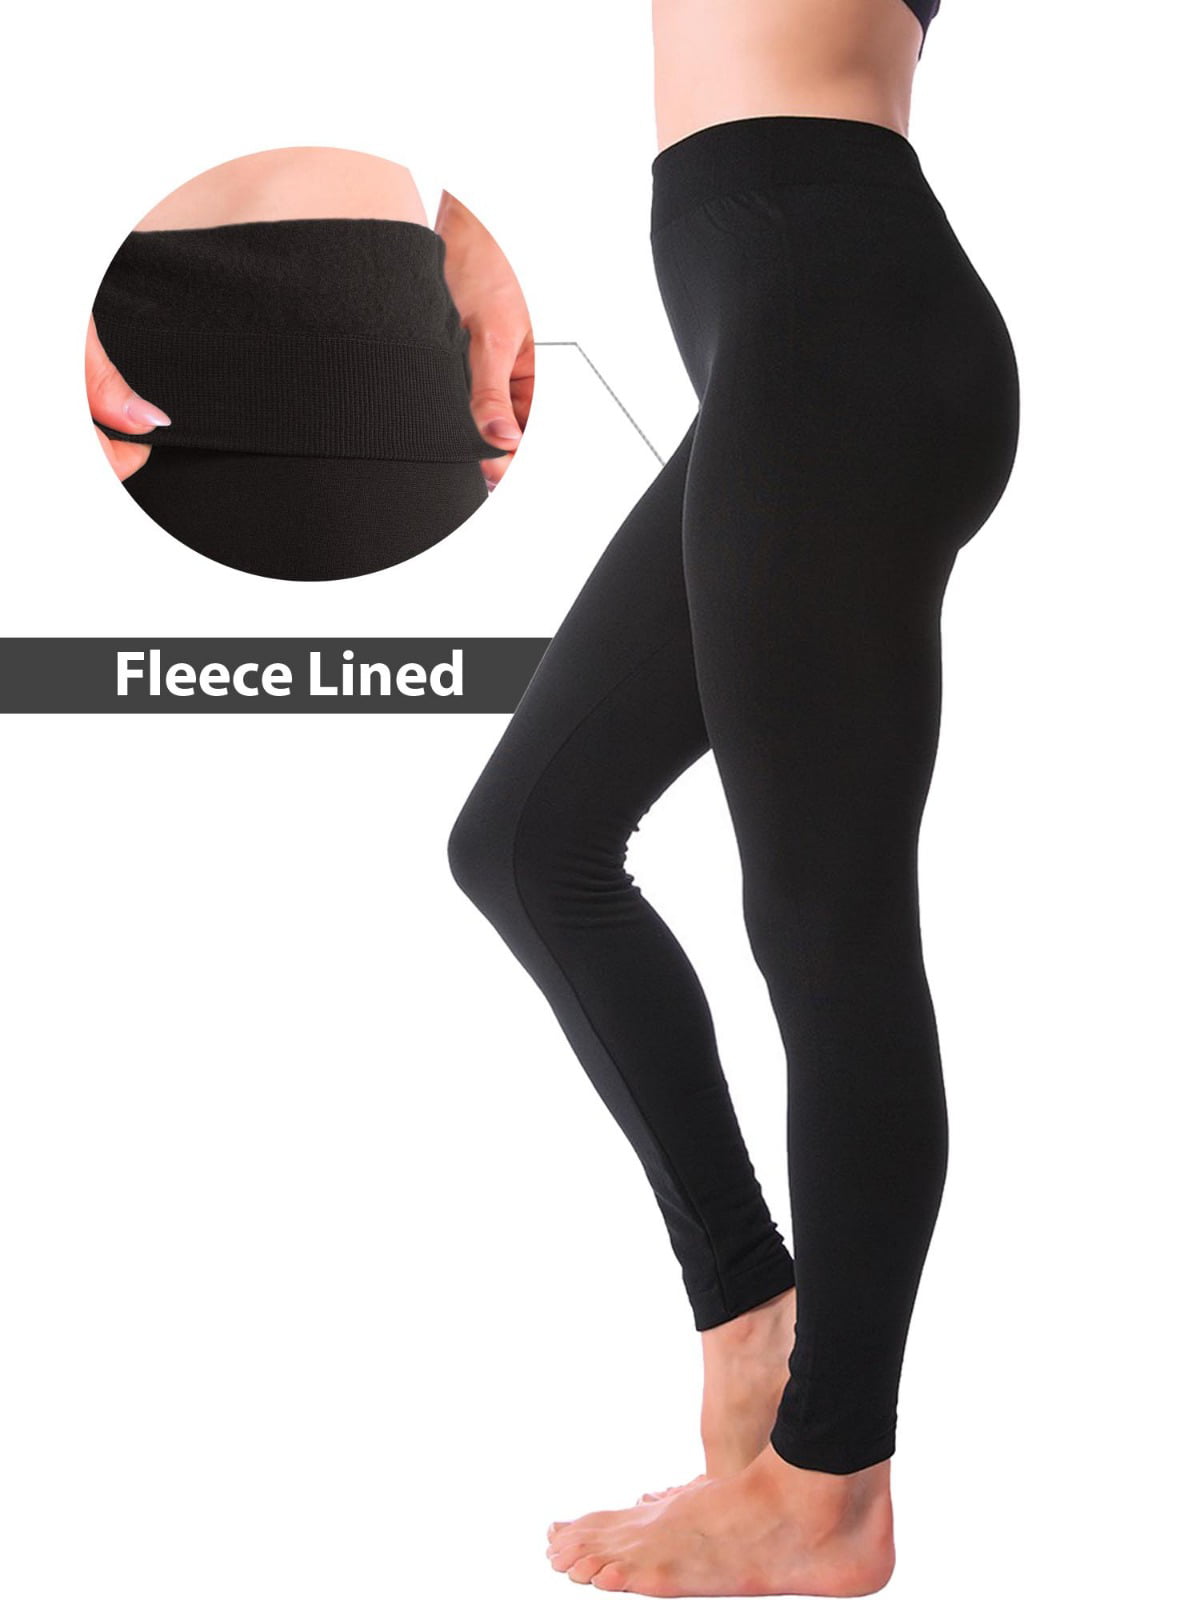 5 Best Winter Leggings for Women Starting at Rs. 447 - The Economic Times